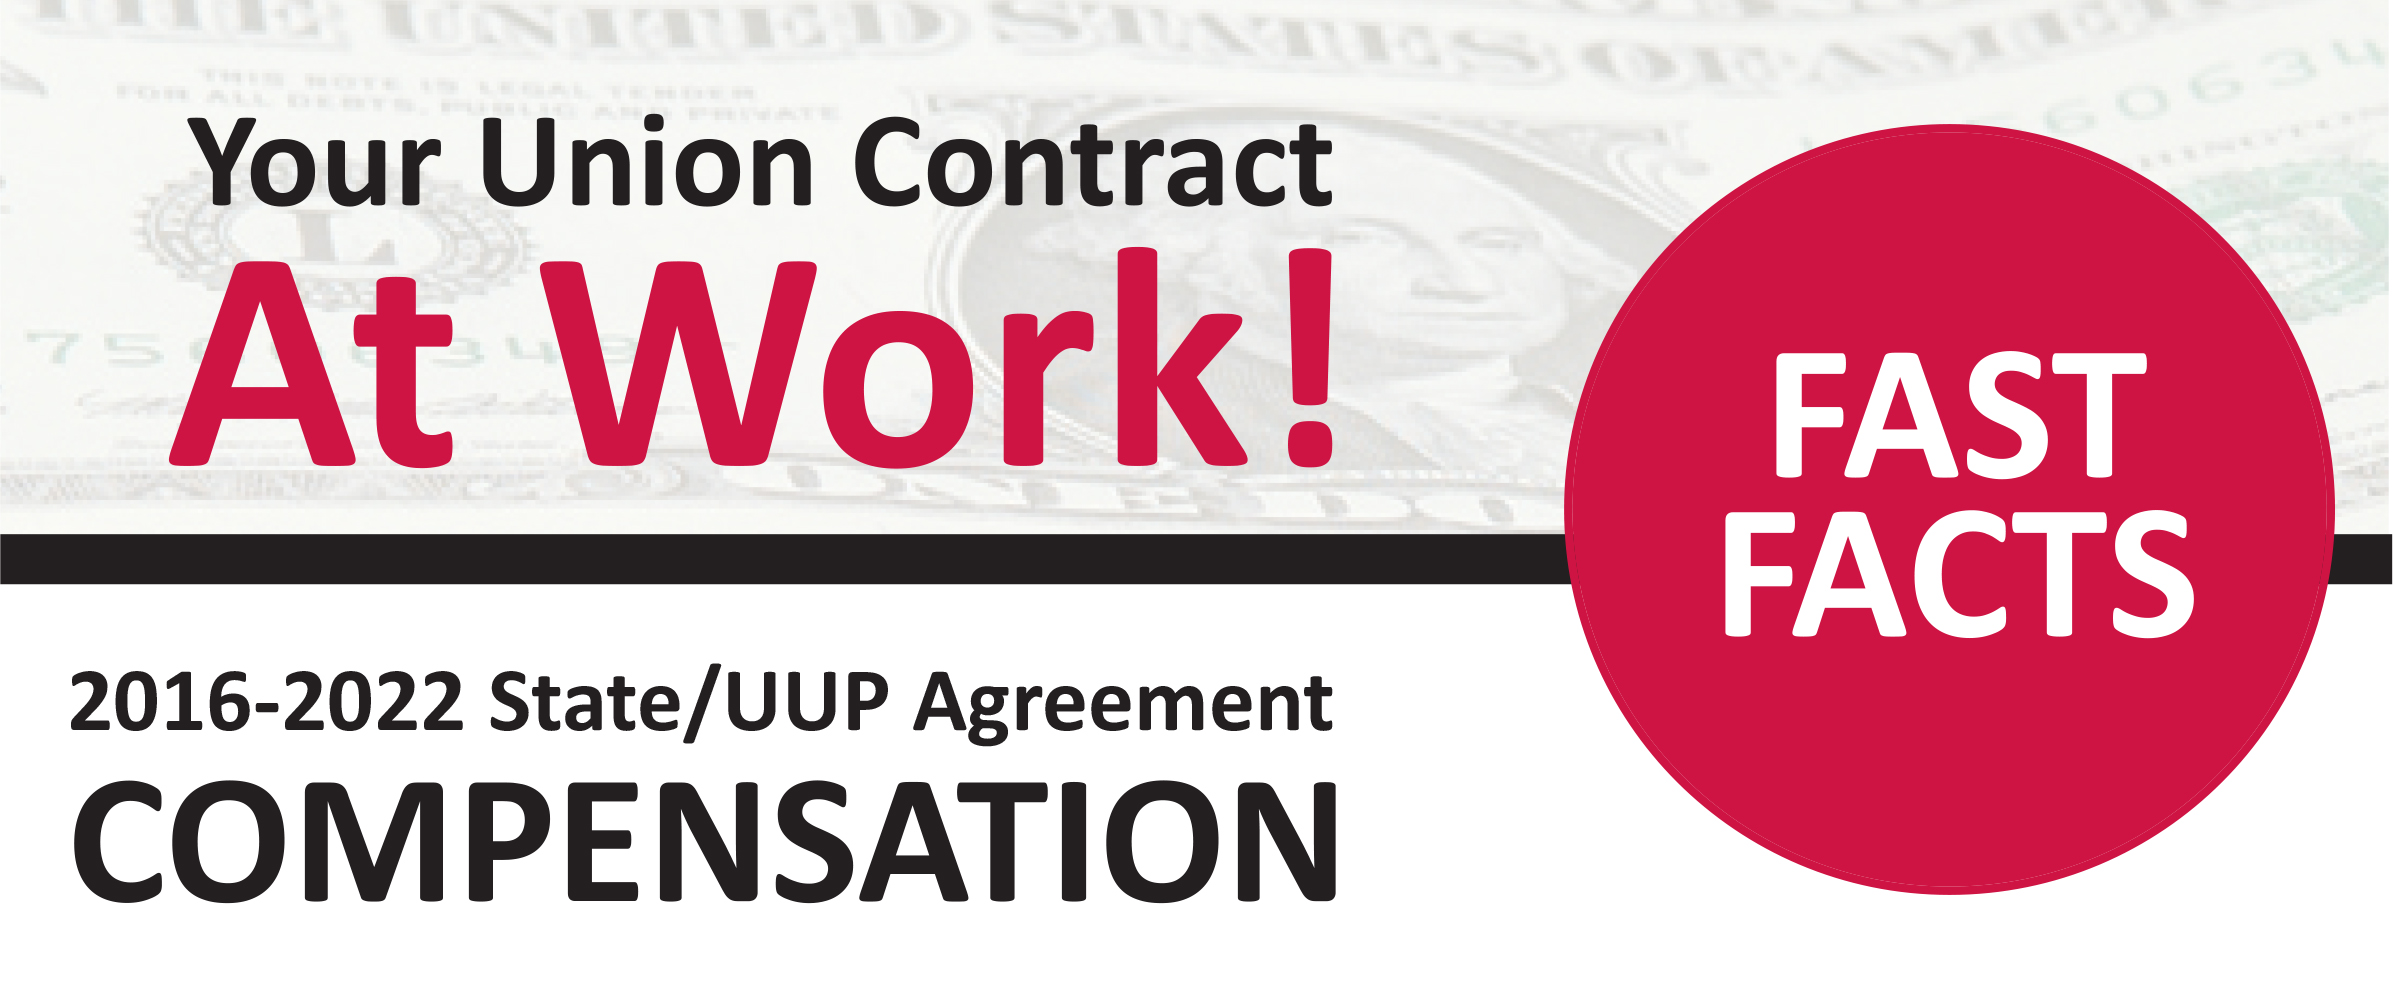 UUPdate Pay increases in new UUP contract continue Dec. 12